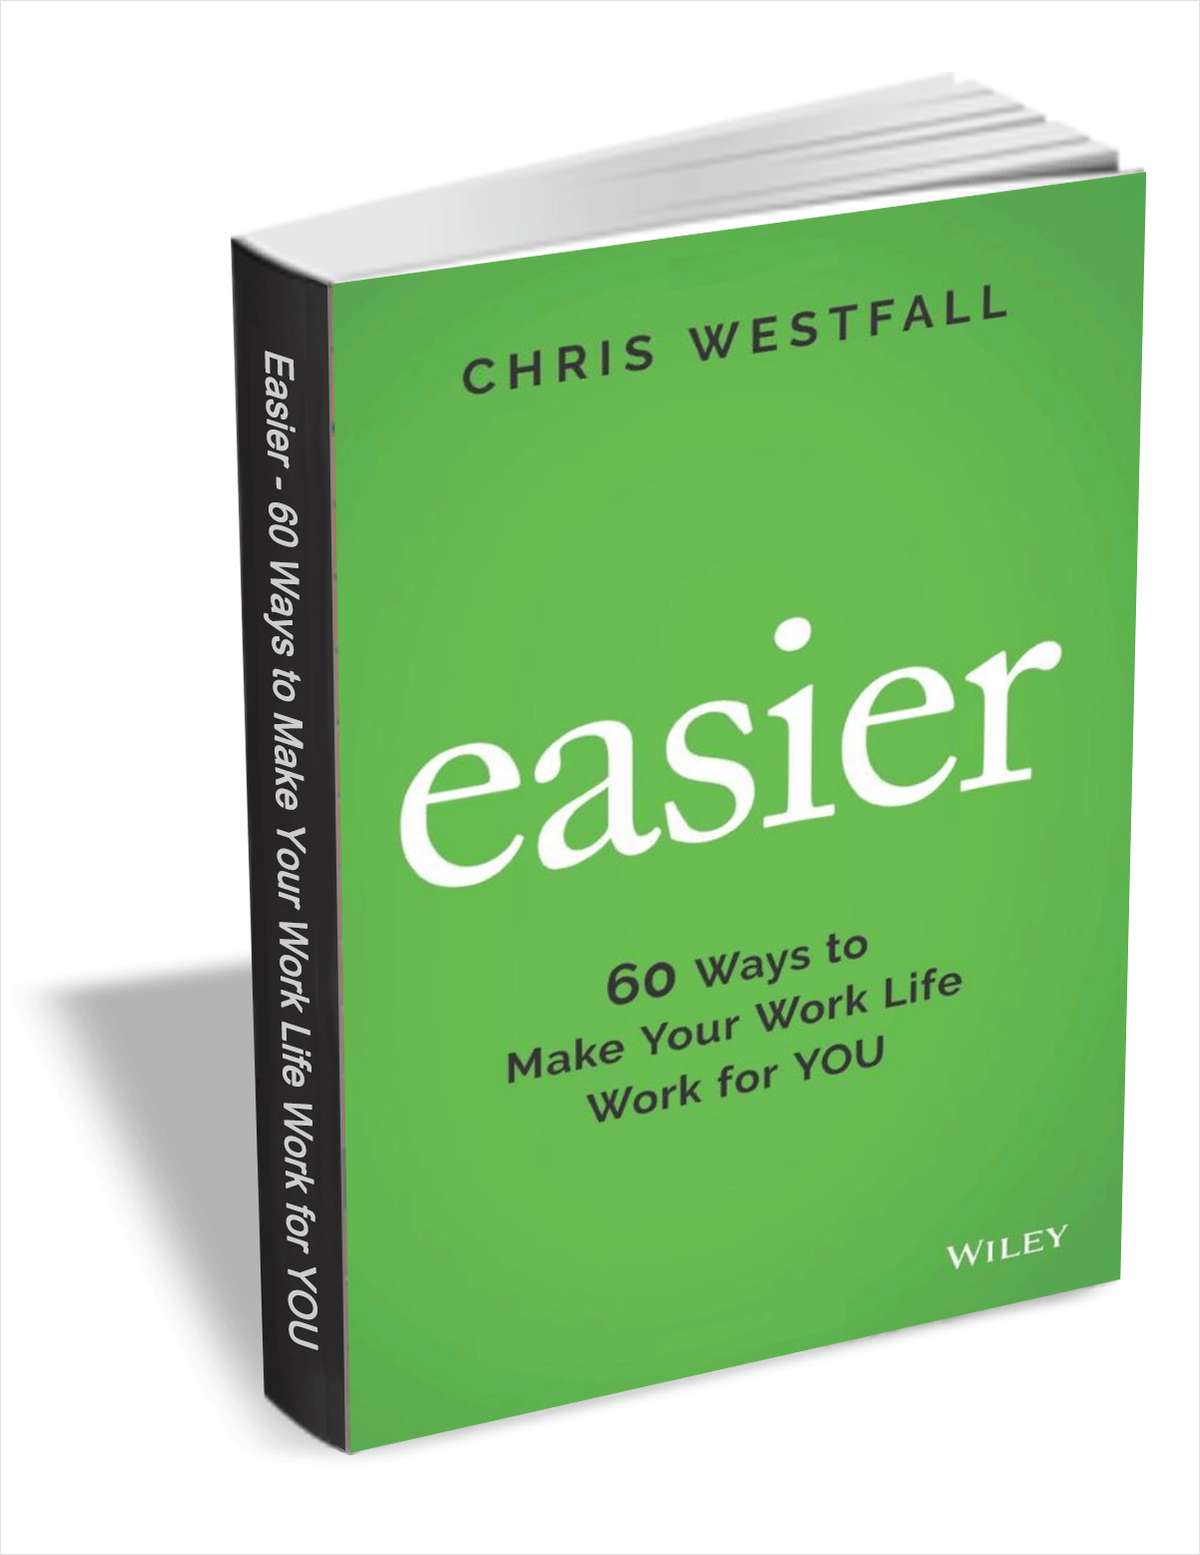 Easier: 60 Ways to Make Your Work Life Work for You ($15.00 Value) FREE for a Limited Time